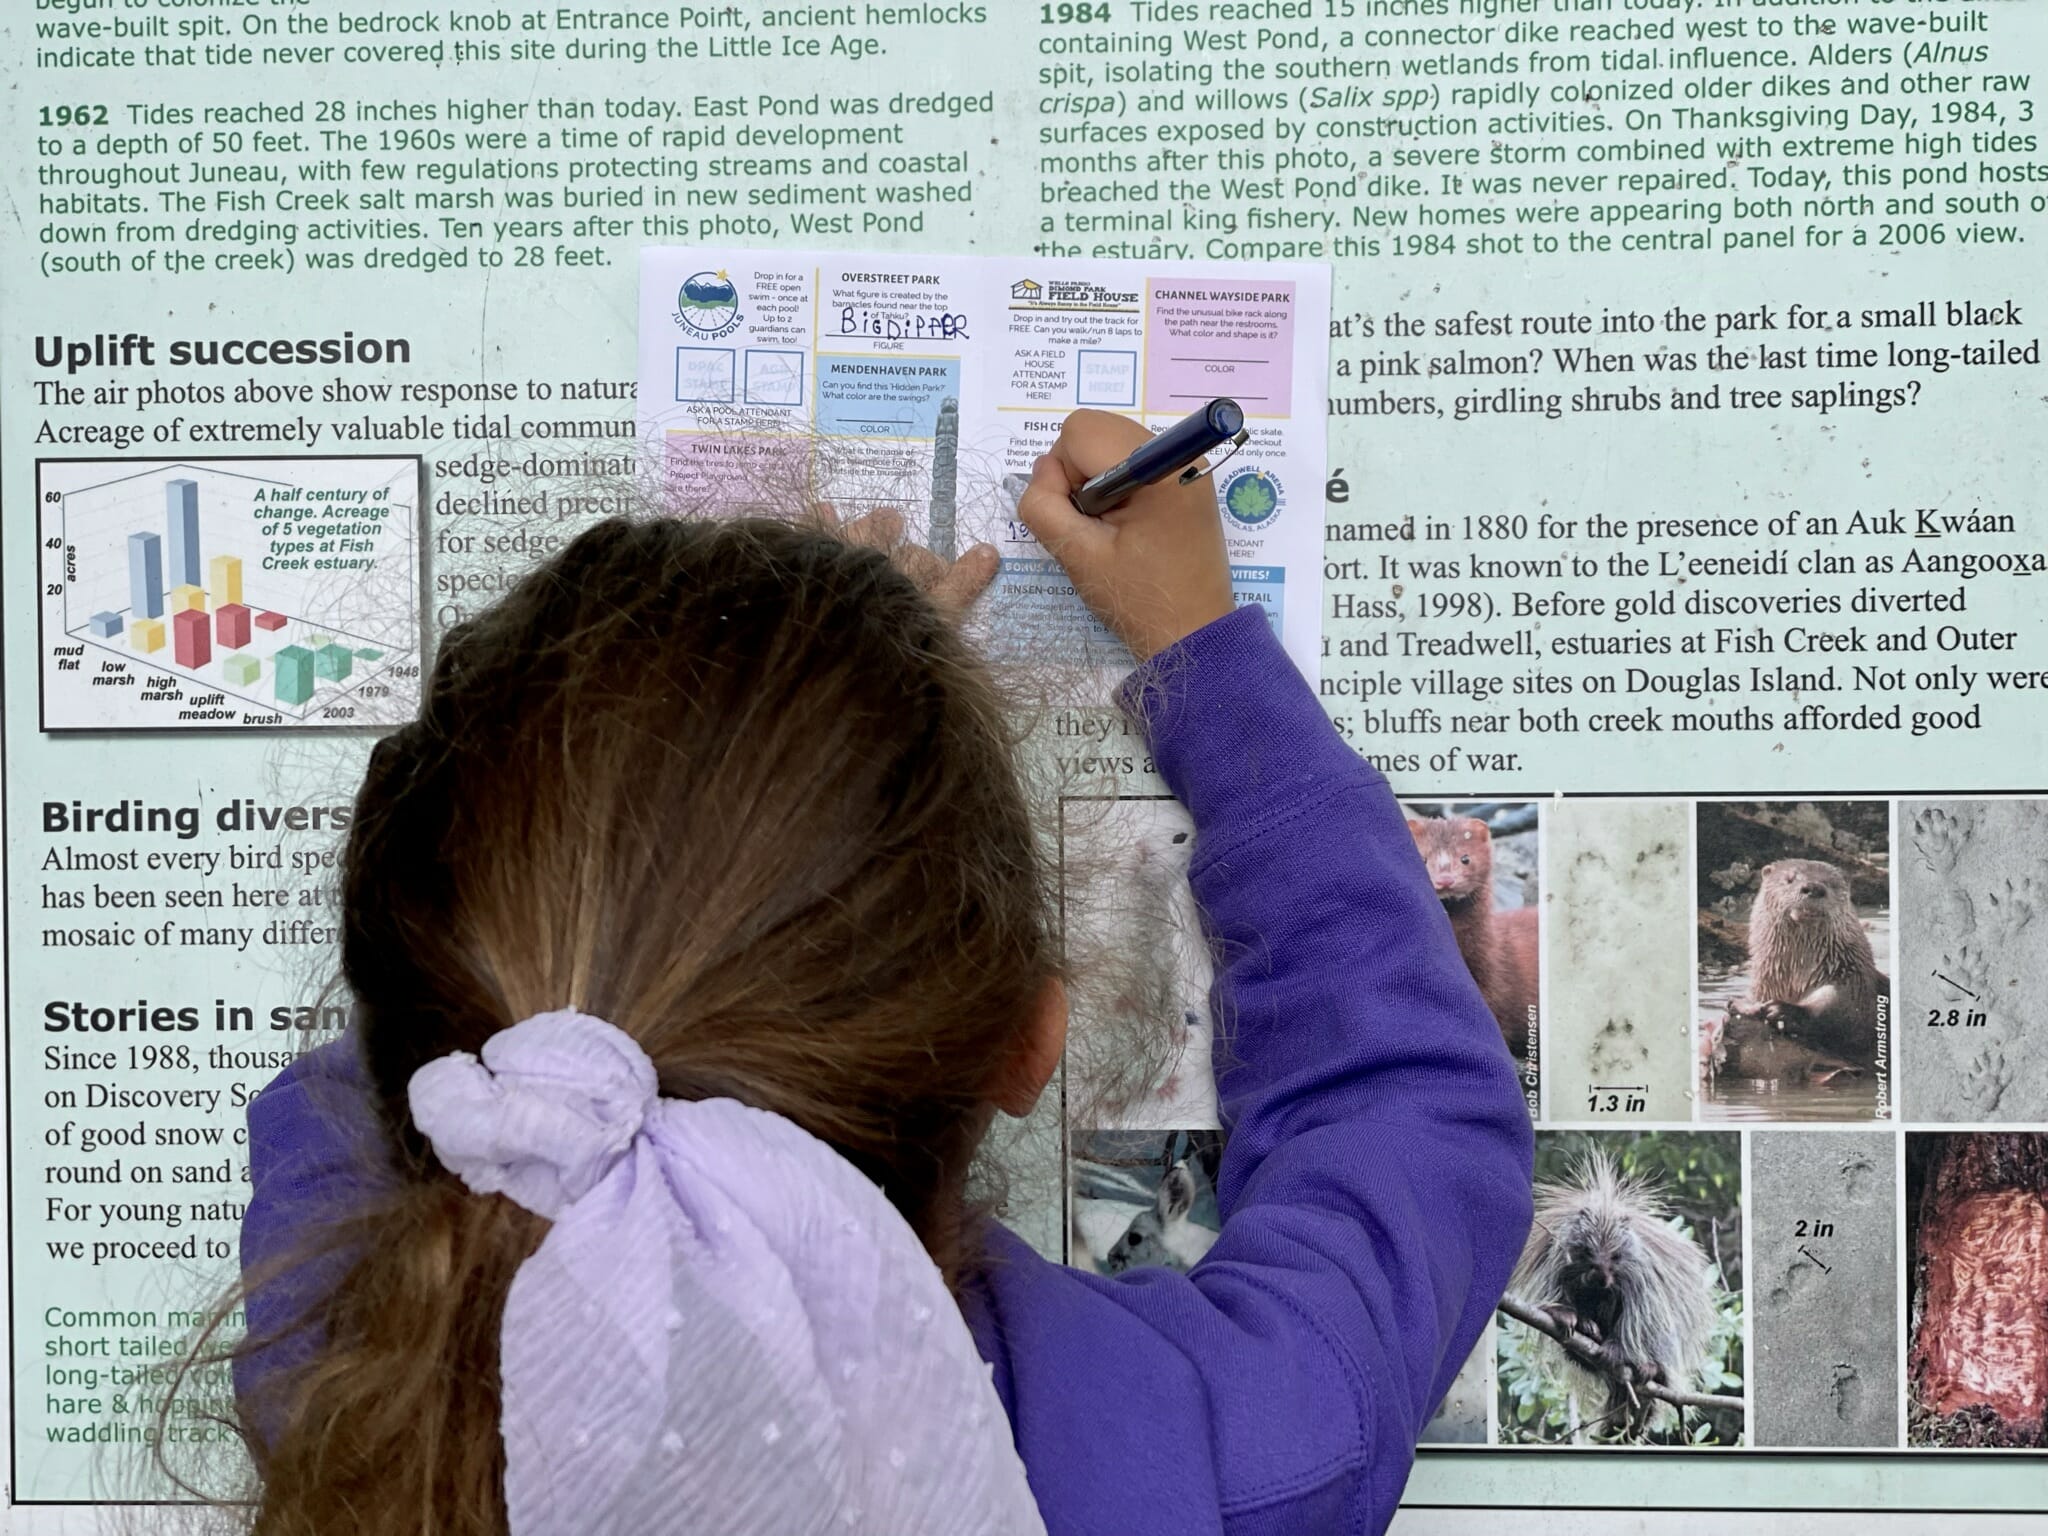 A girl filling out her Passport to Play at an interpretive sign at Fish Creek Park.